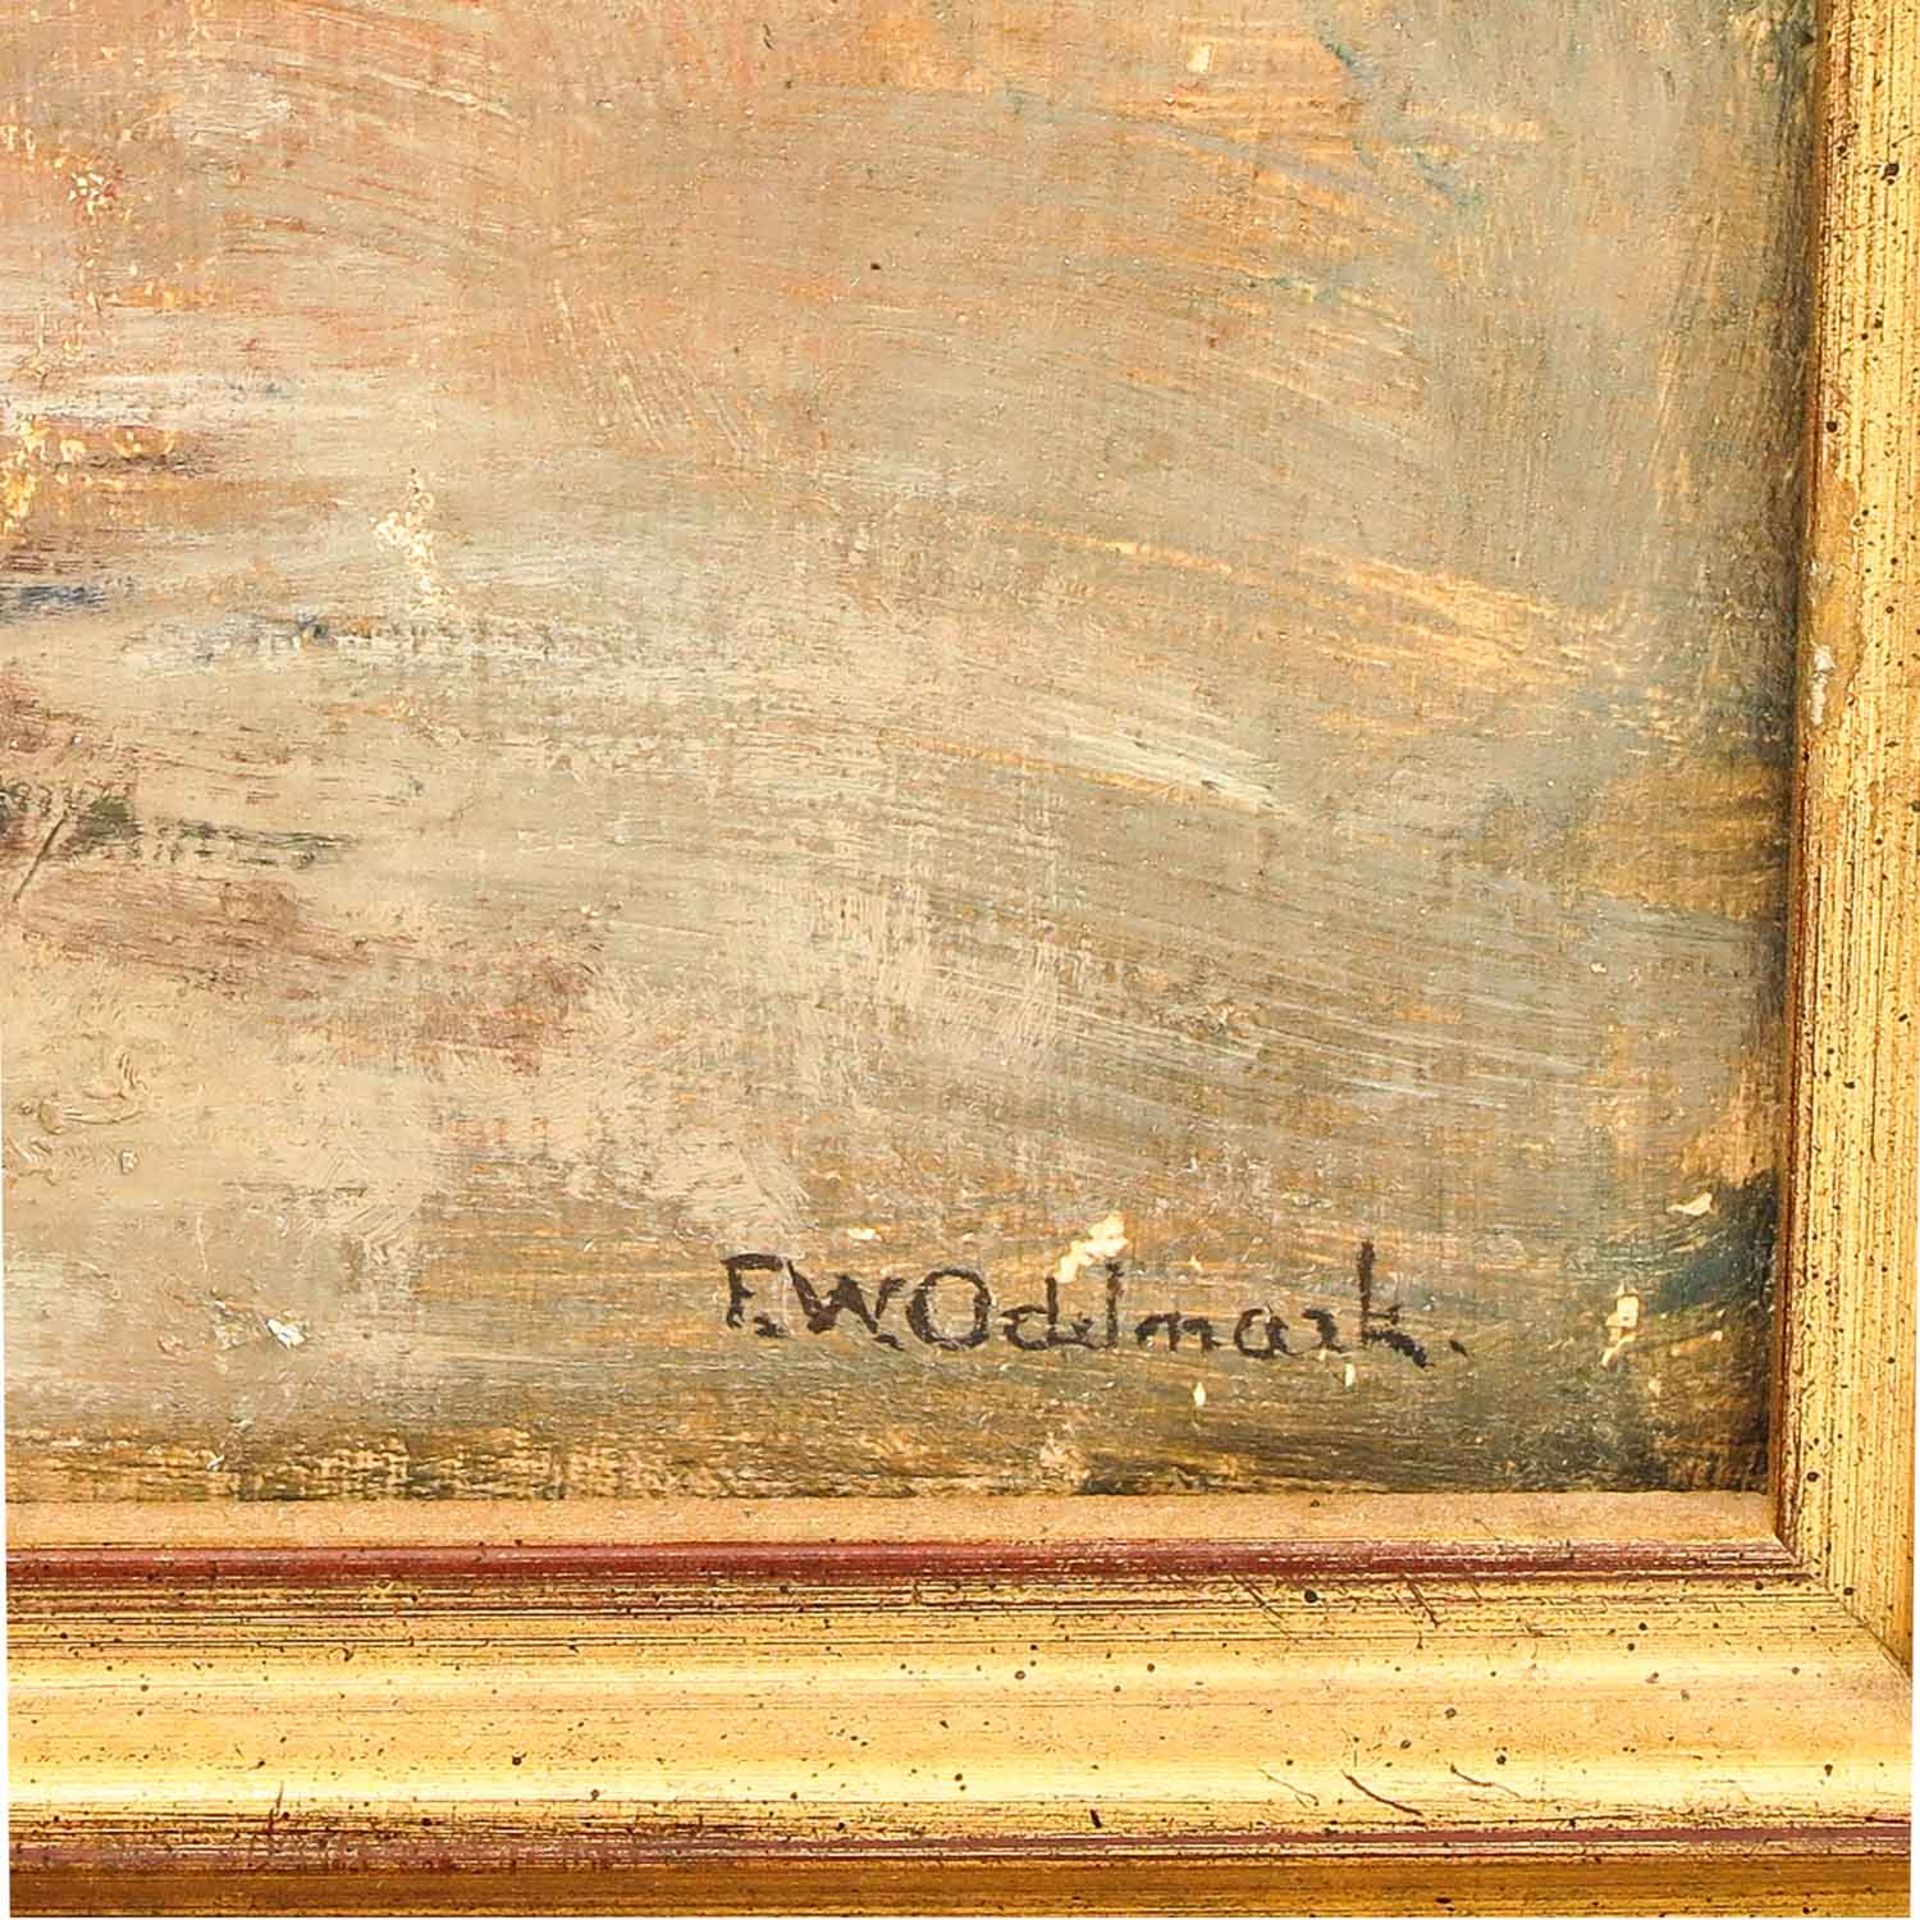 An Oil on Canvas Signed F.W. Odelmark - Image 3 of 9